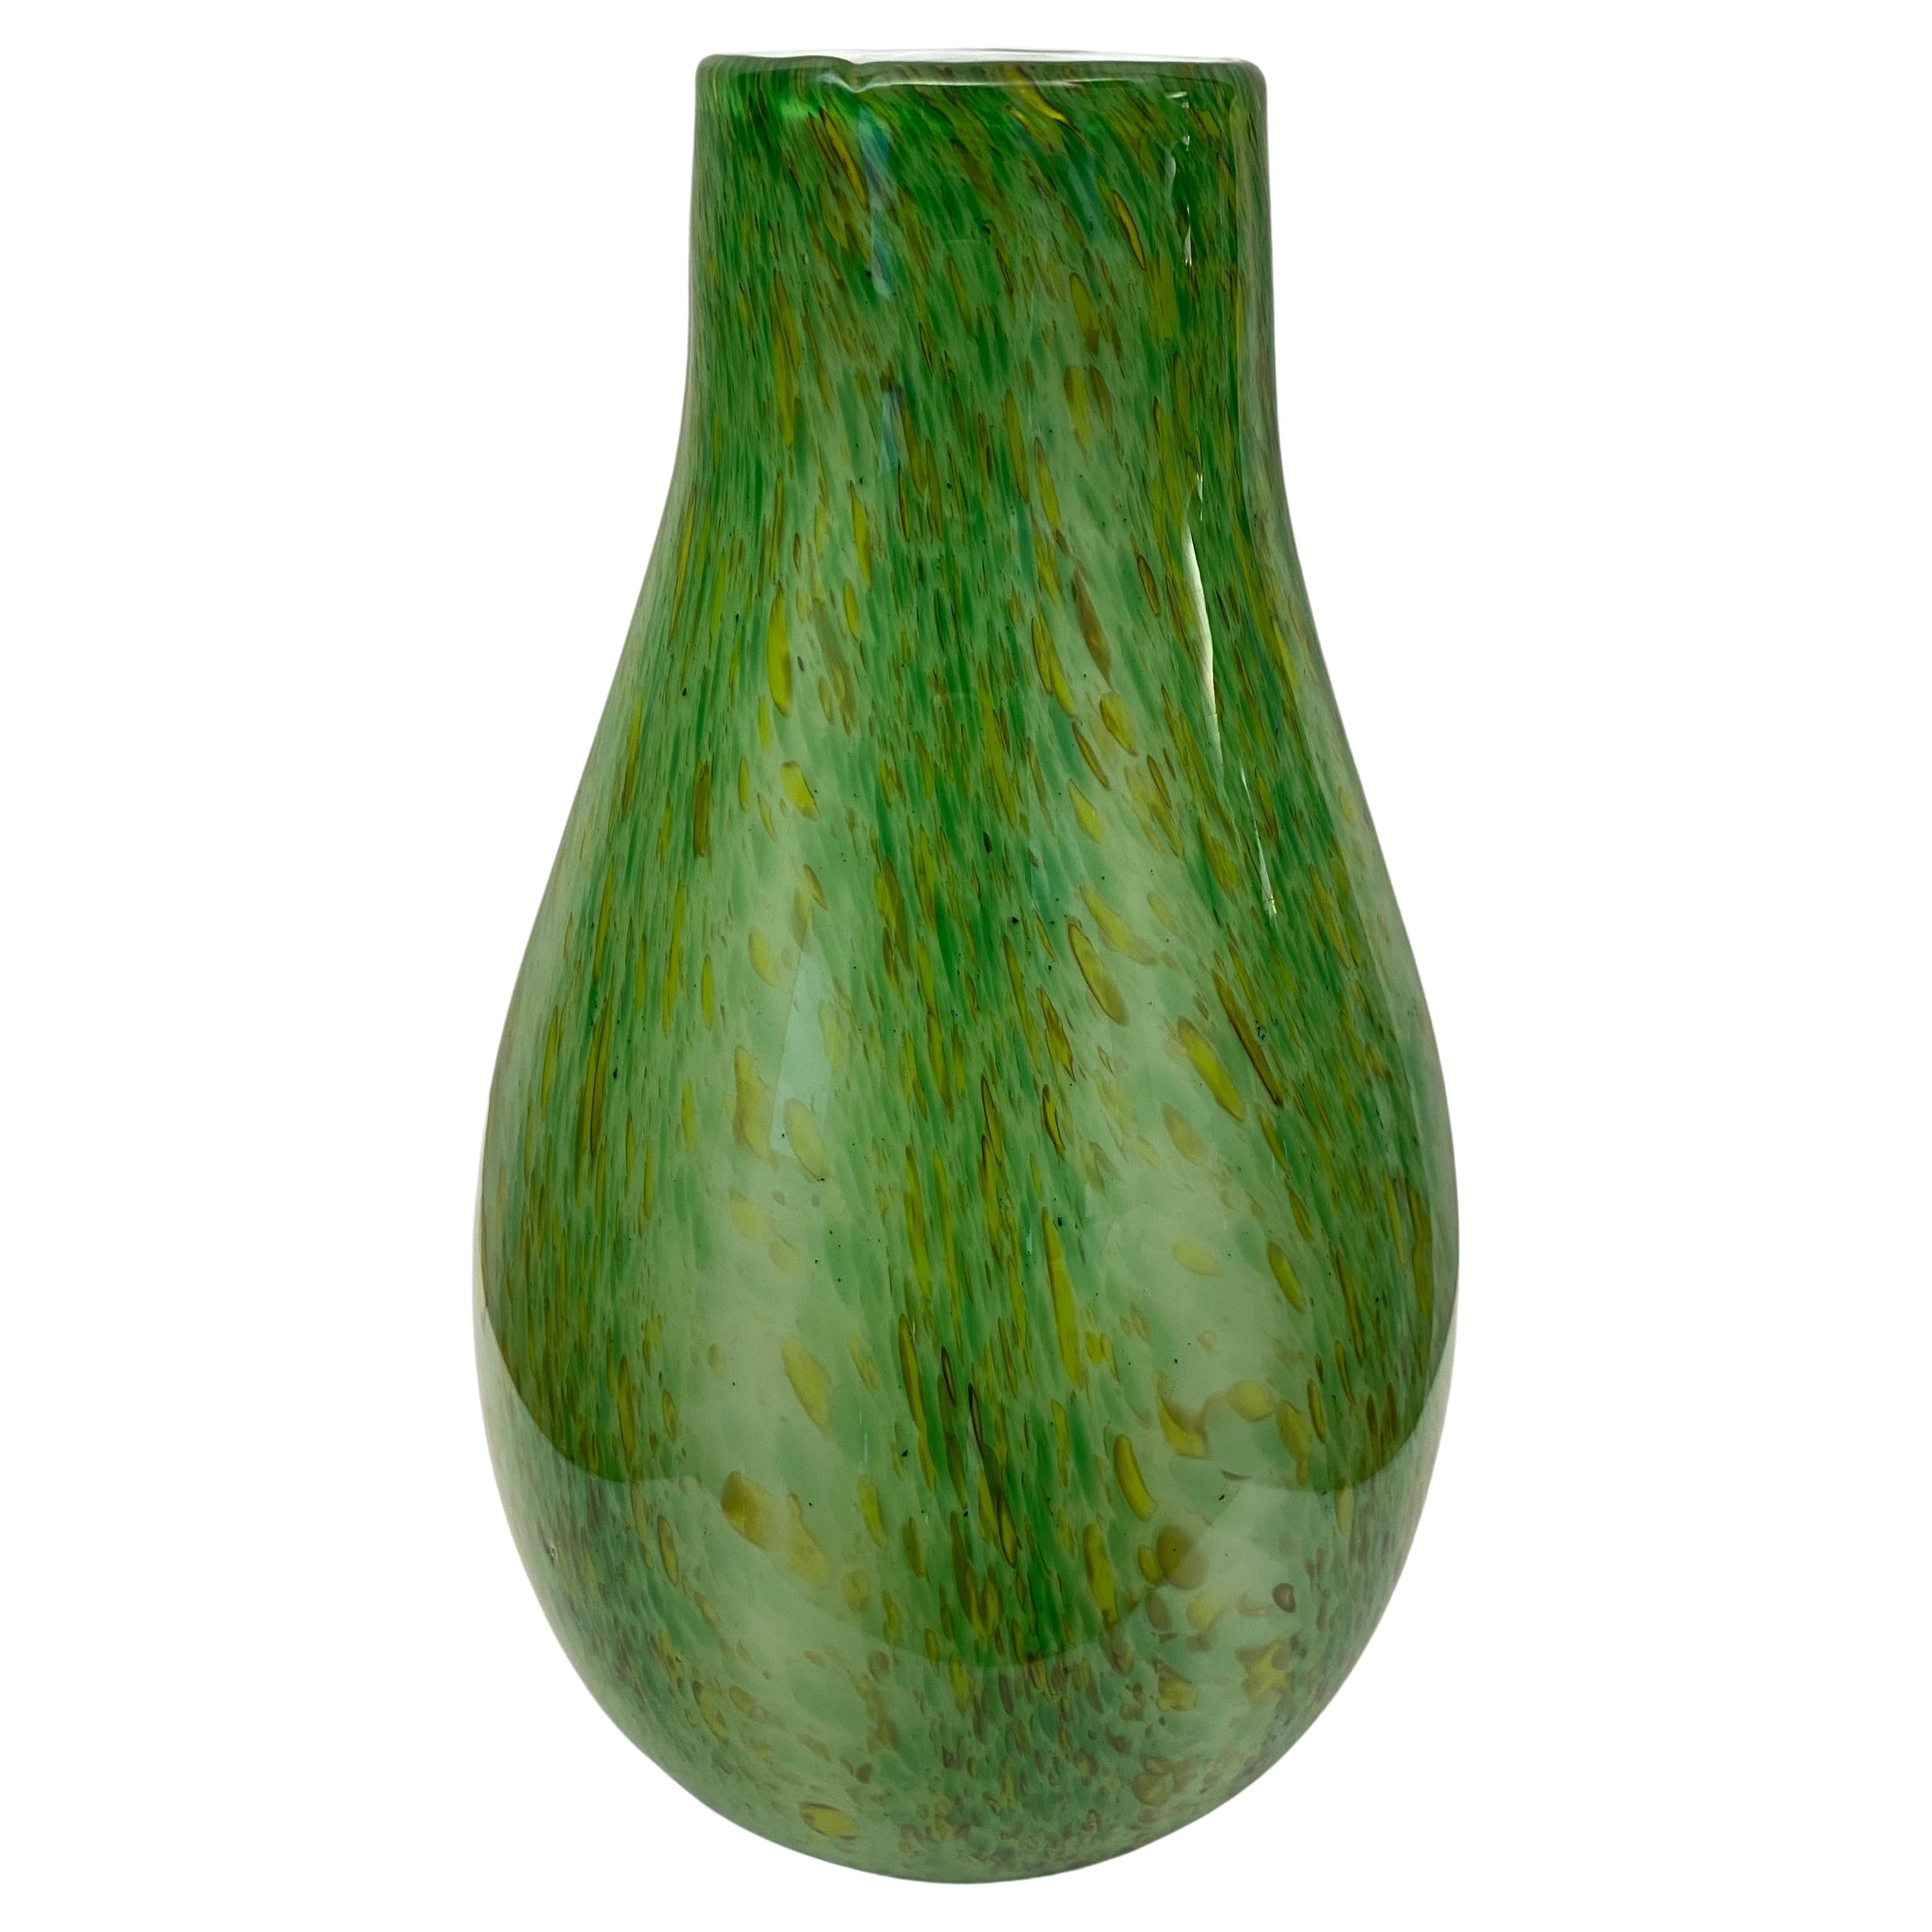 Formia Green Murano Art Glass Vase in the manner of Hilton McConnico